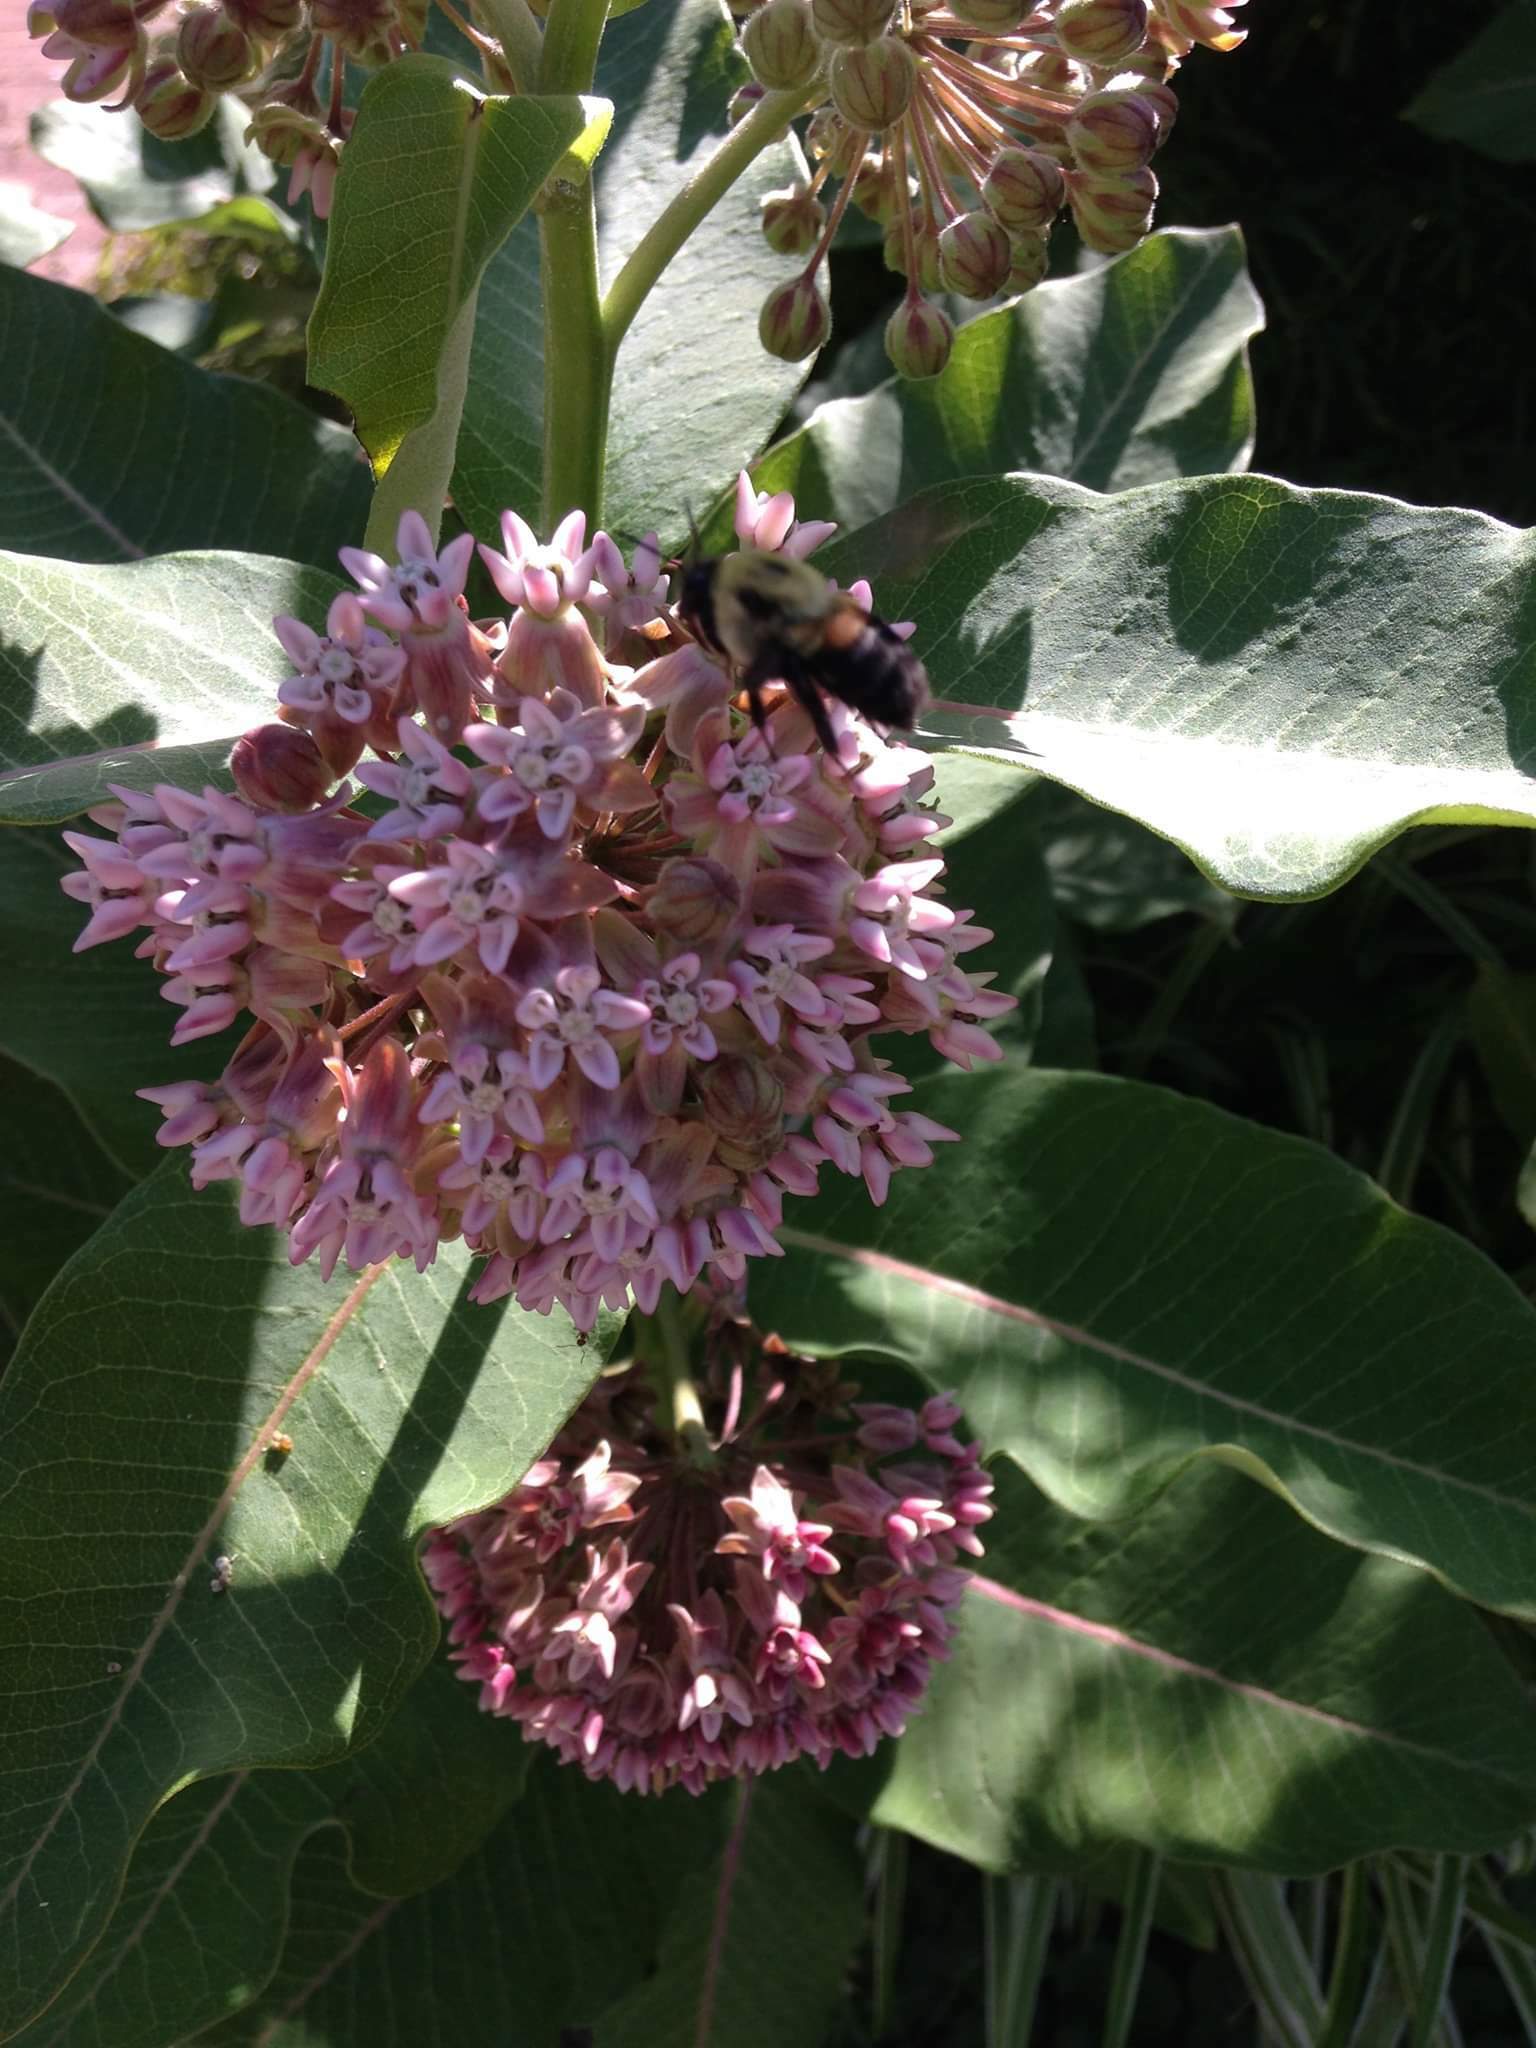 A flowering milkweed plant. BRIAN SMITH